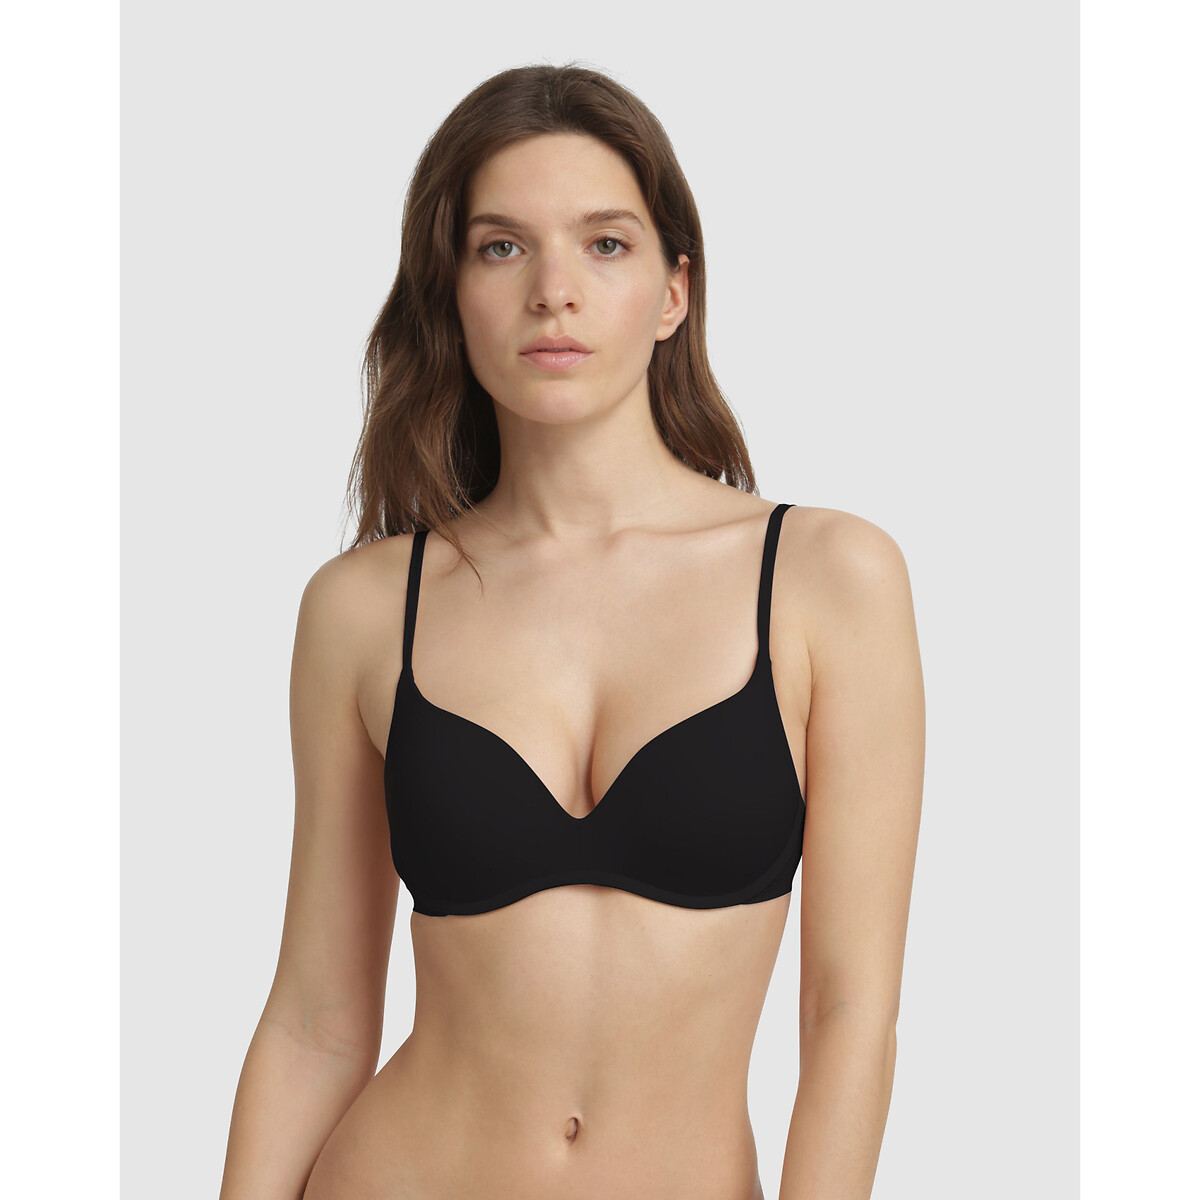 Image of Invisifree Non-Underwired Bra with Push-Up Effect